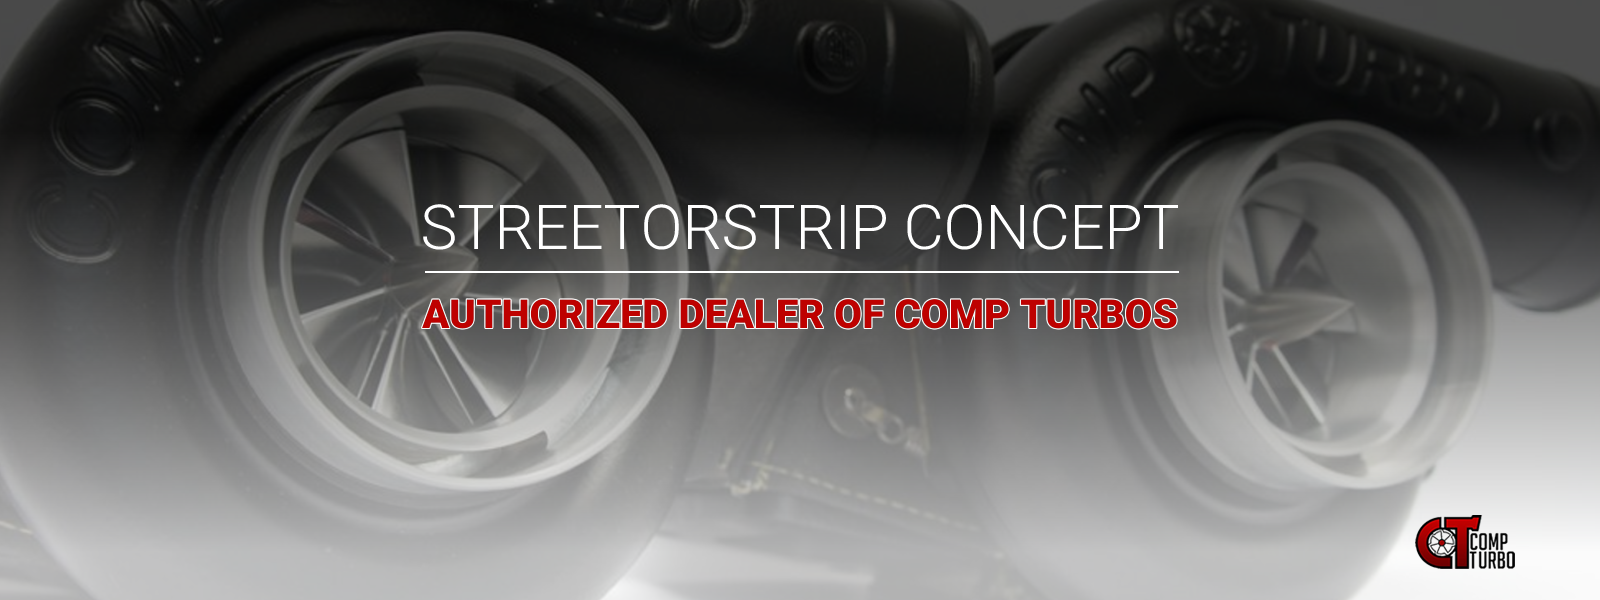 streetorstrip concept is an authorized dealer of comp turbos